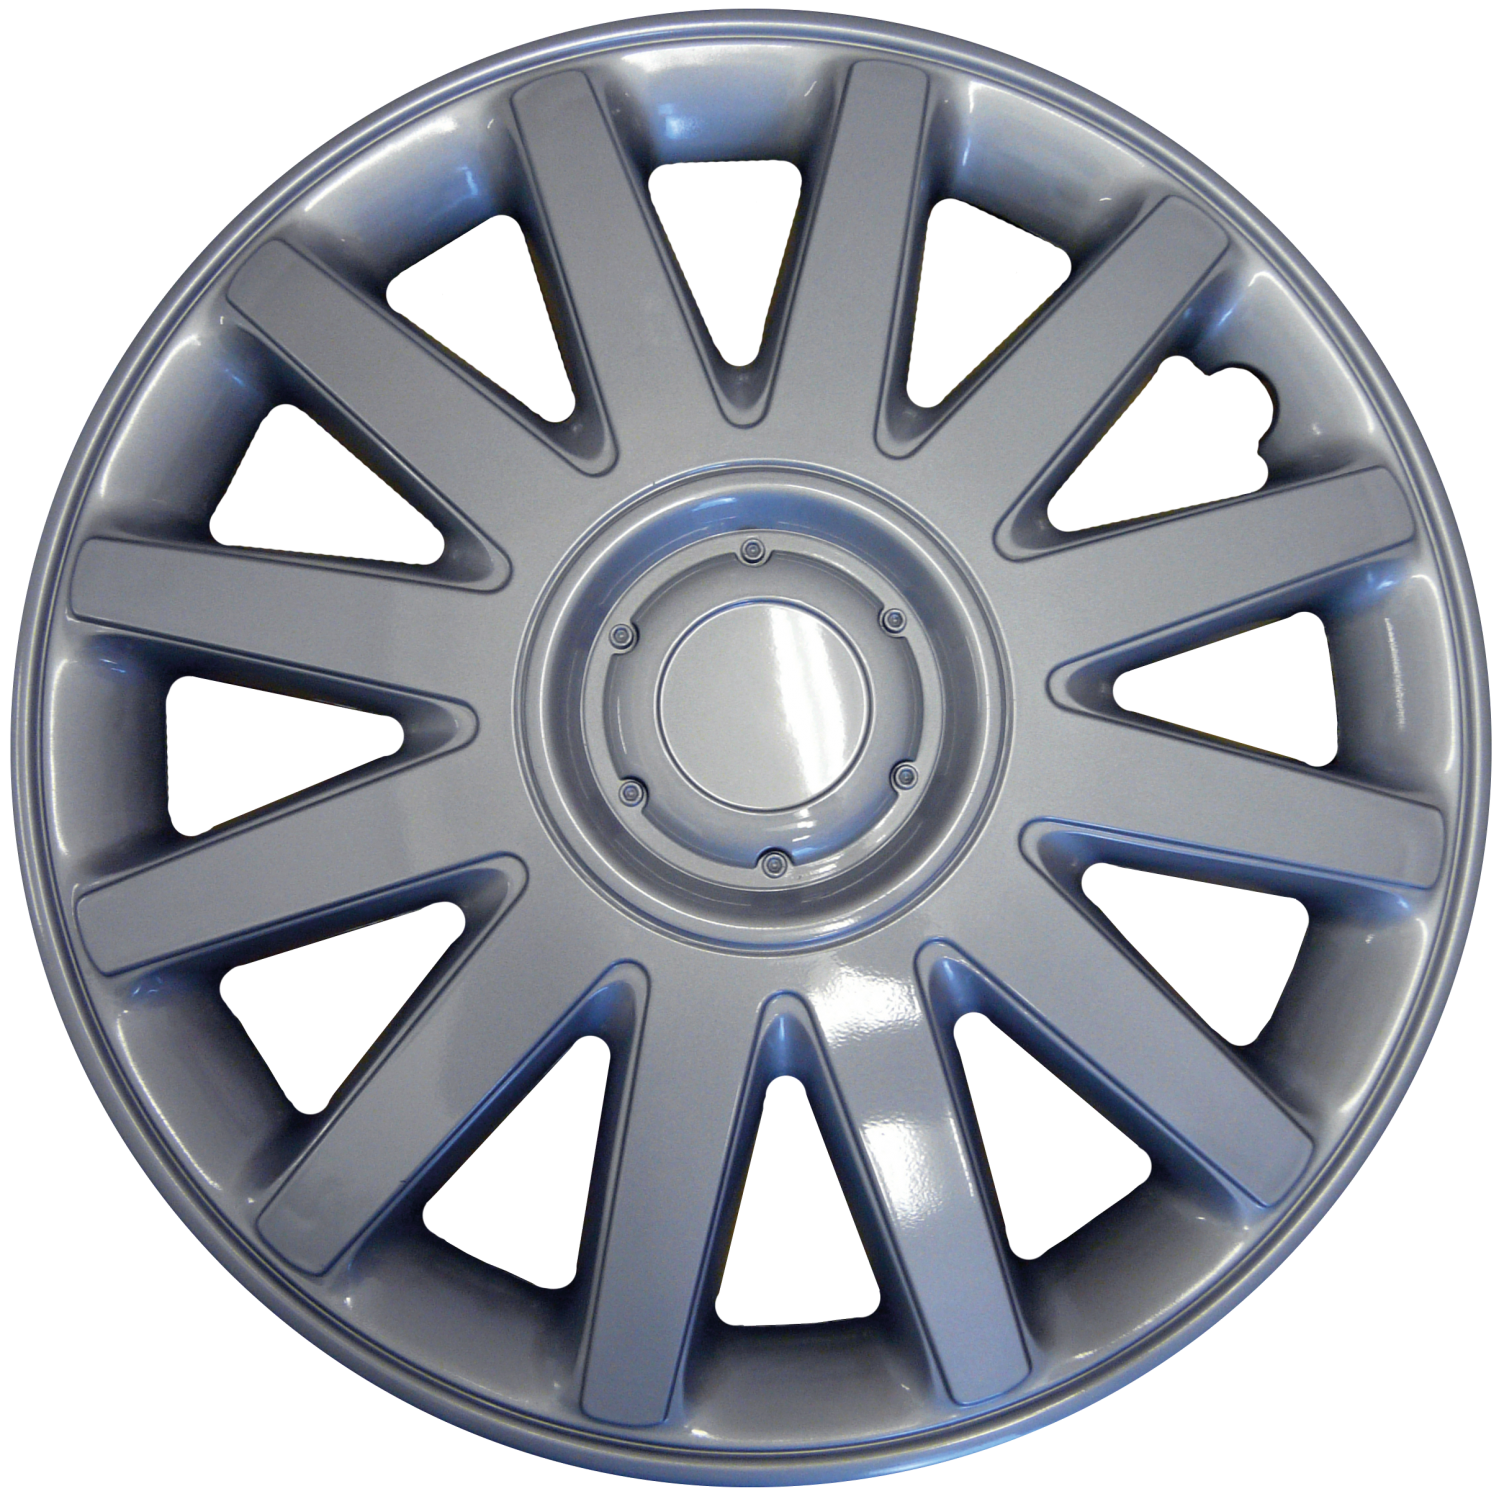 Simply Auto Wheel Trims 16inch - Promotional Image 2